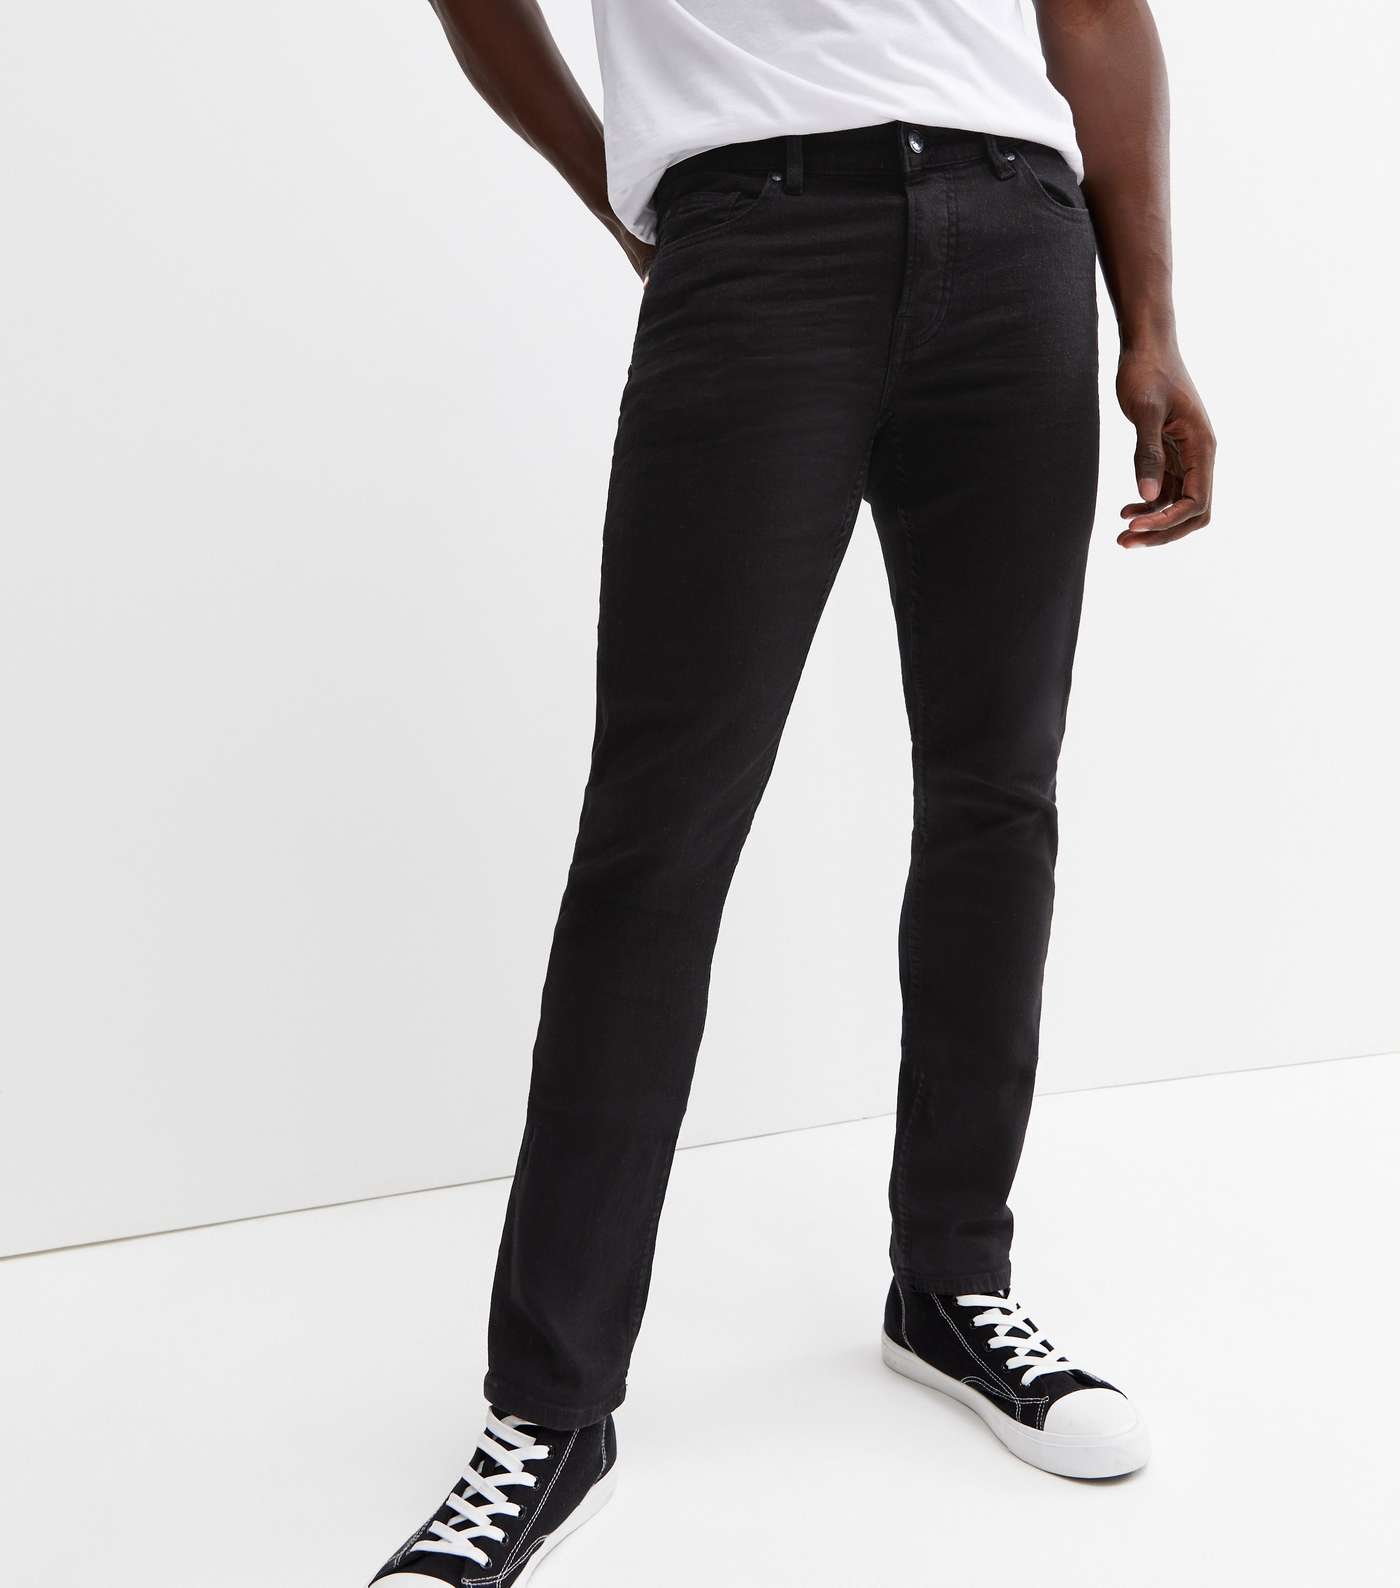 Only & Sons Black Slim Fit Jeans Image 2